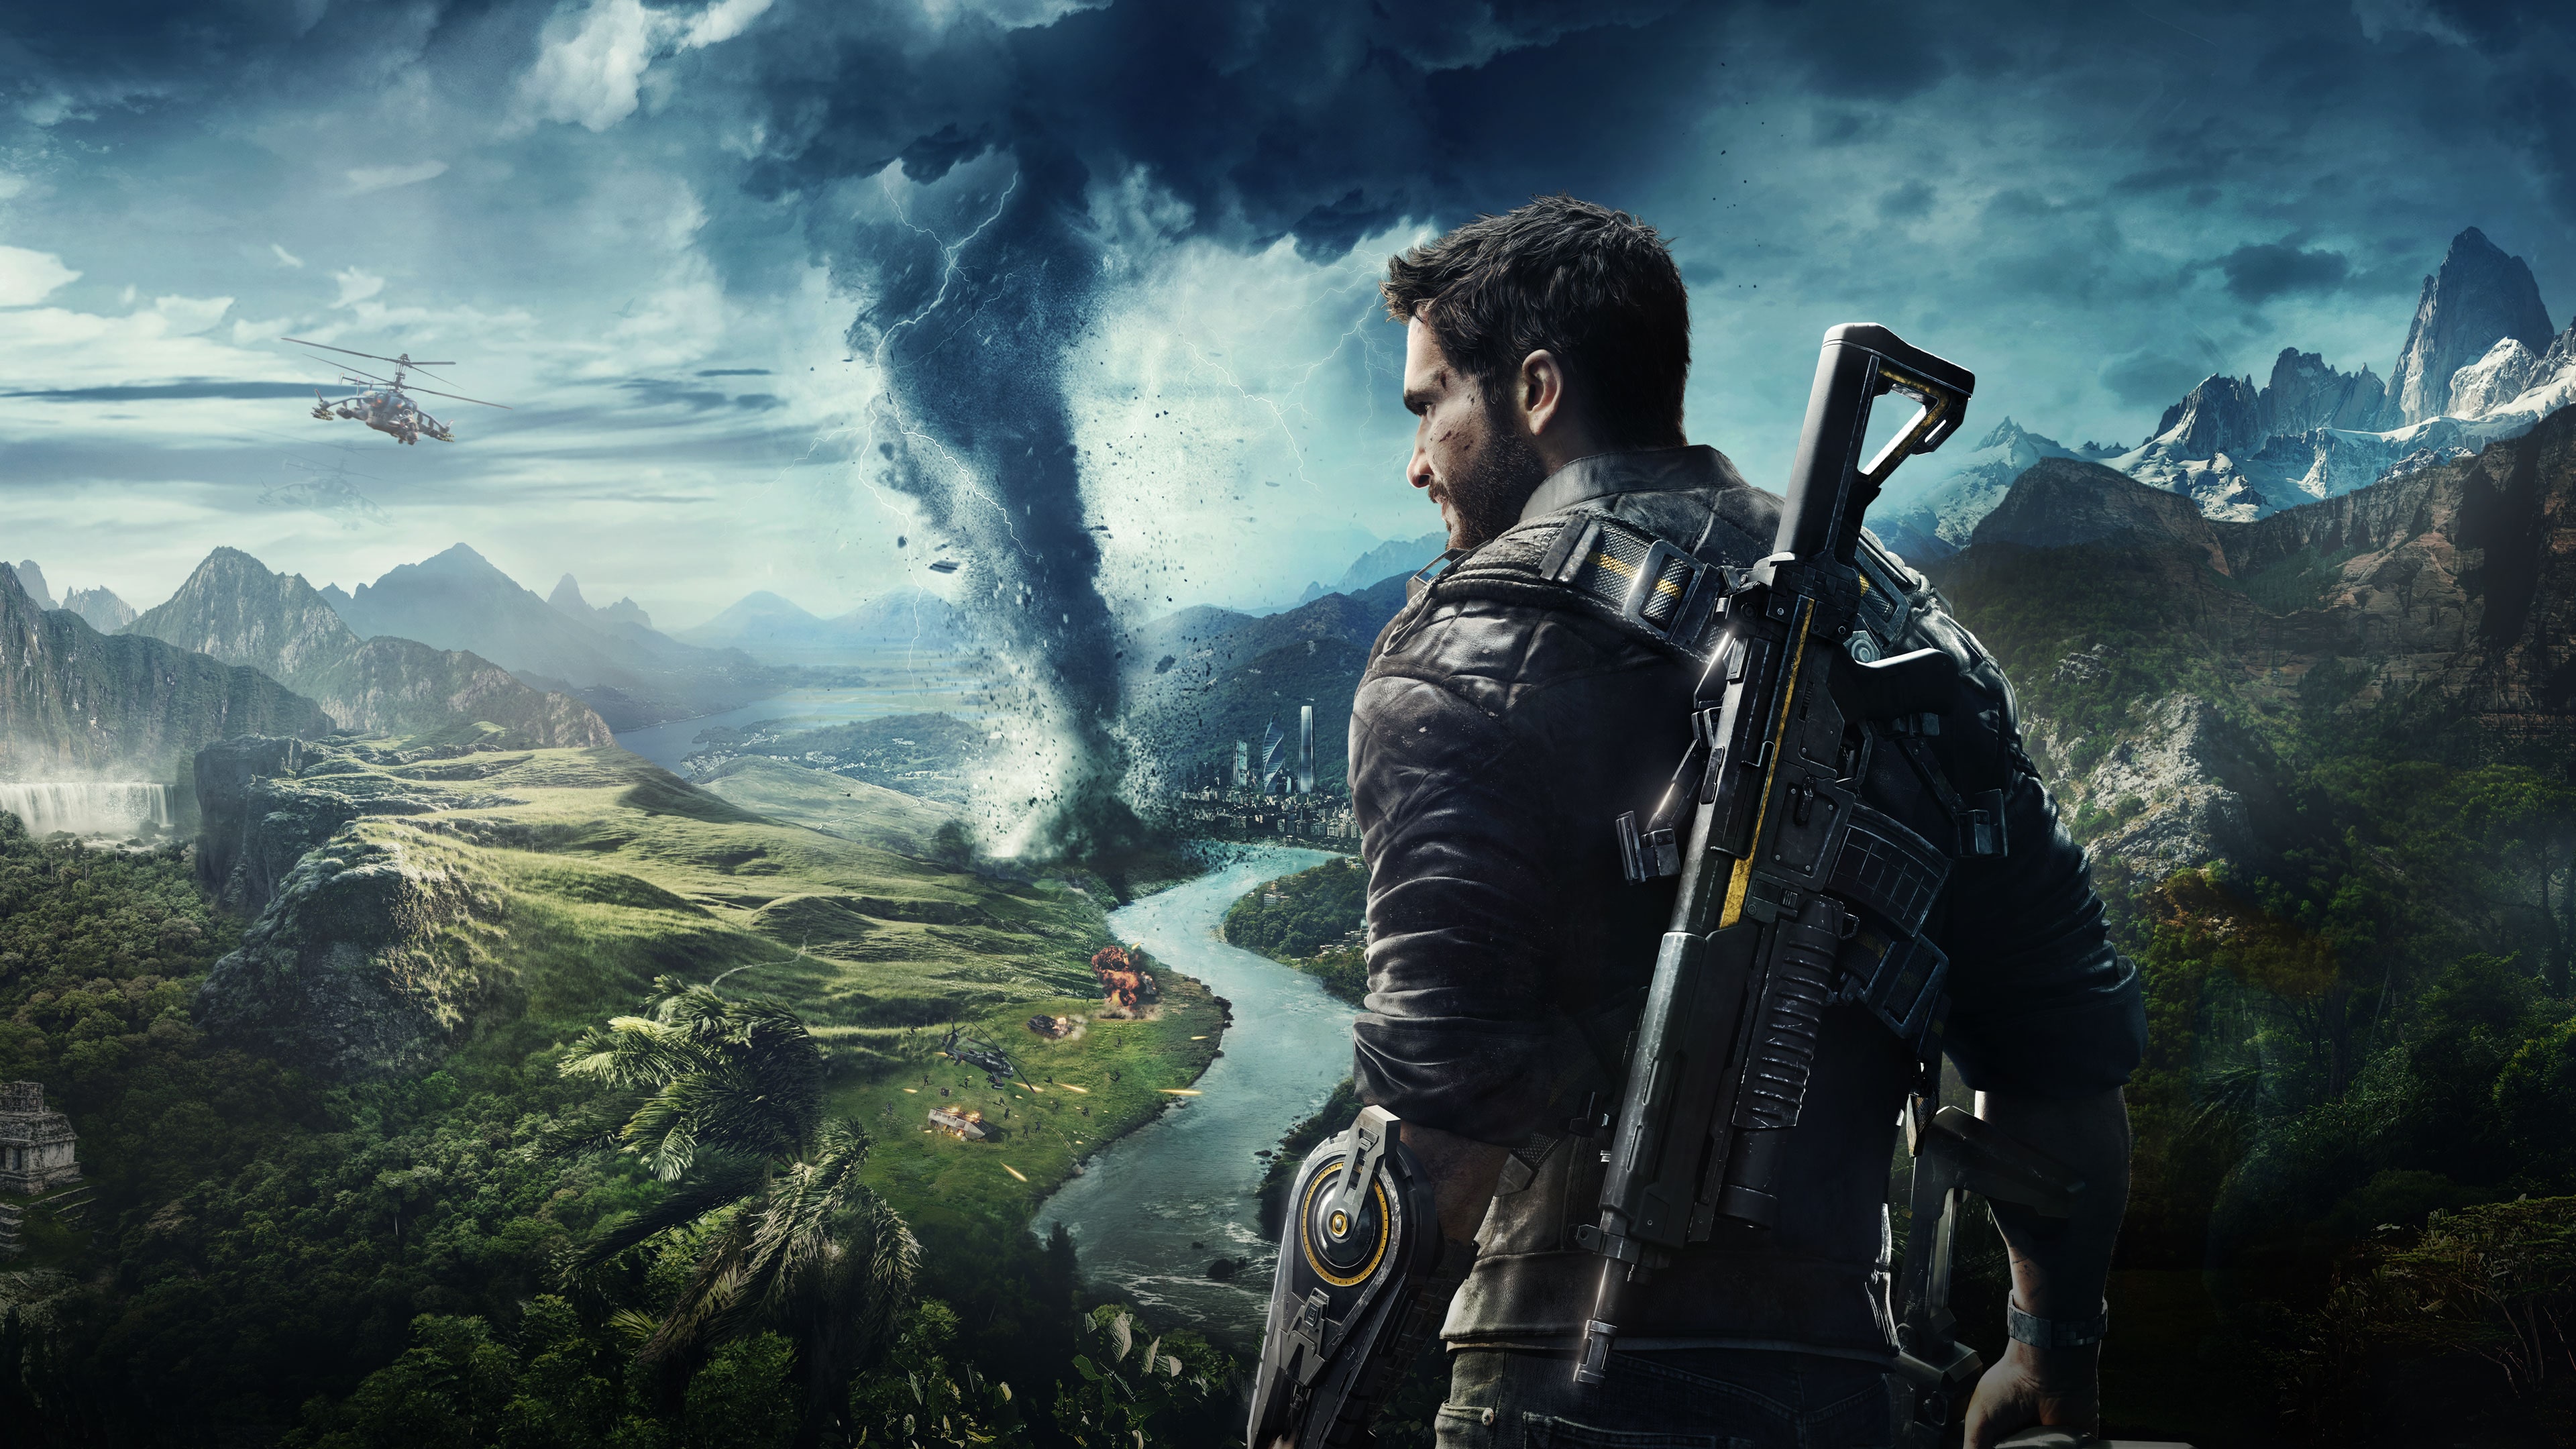 just cause 4 pre order